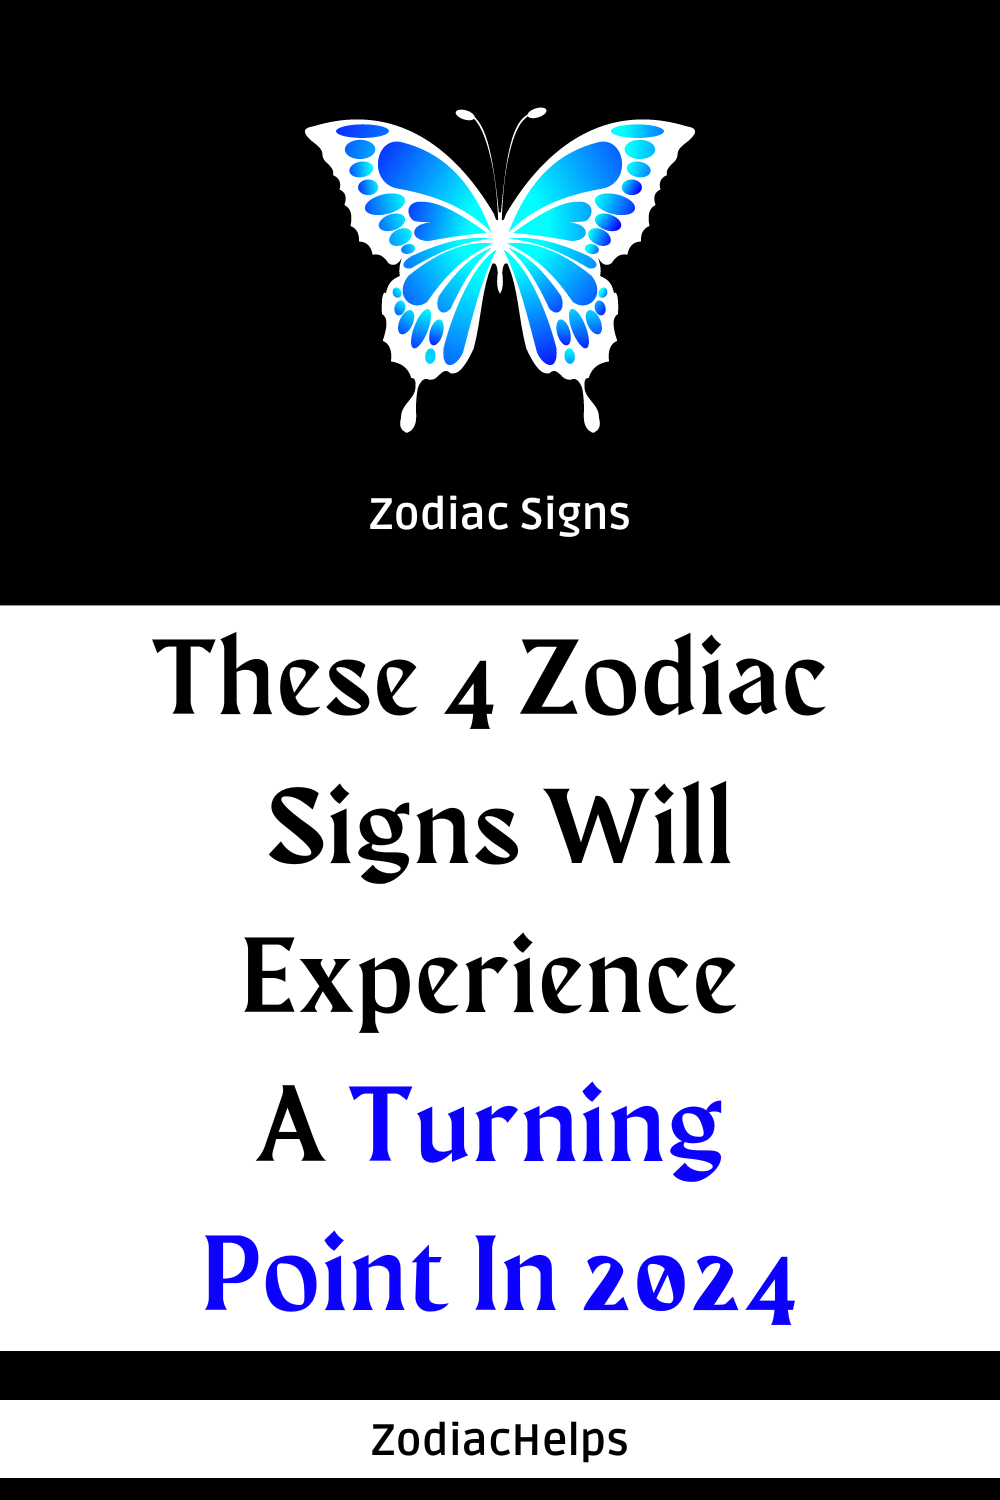 These 4 Zodiac Signs Will Experience A Turning Point In 2024